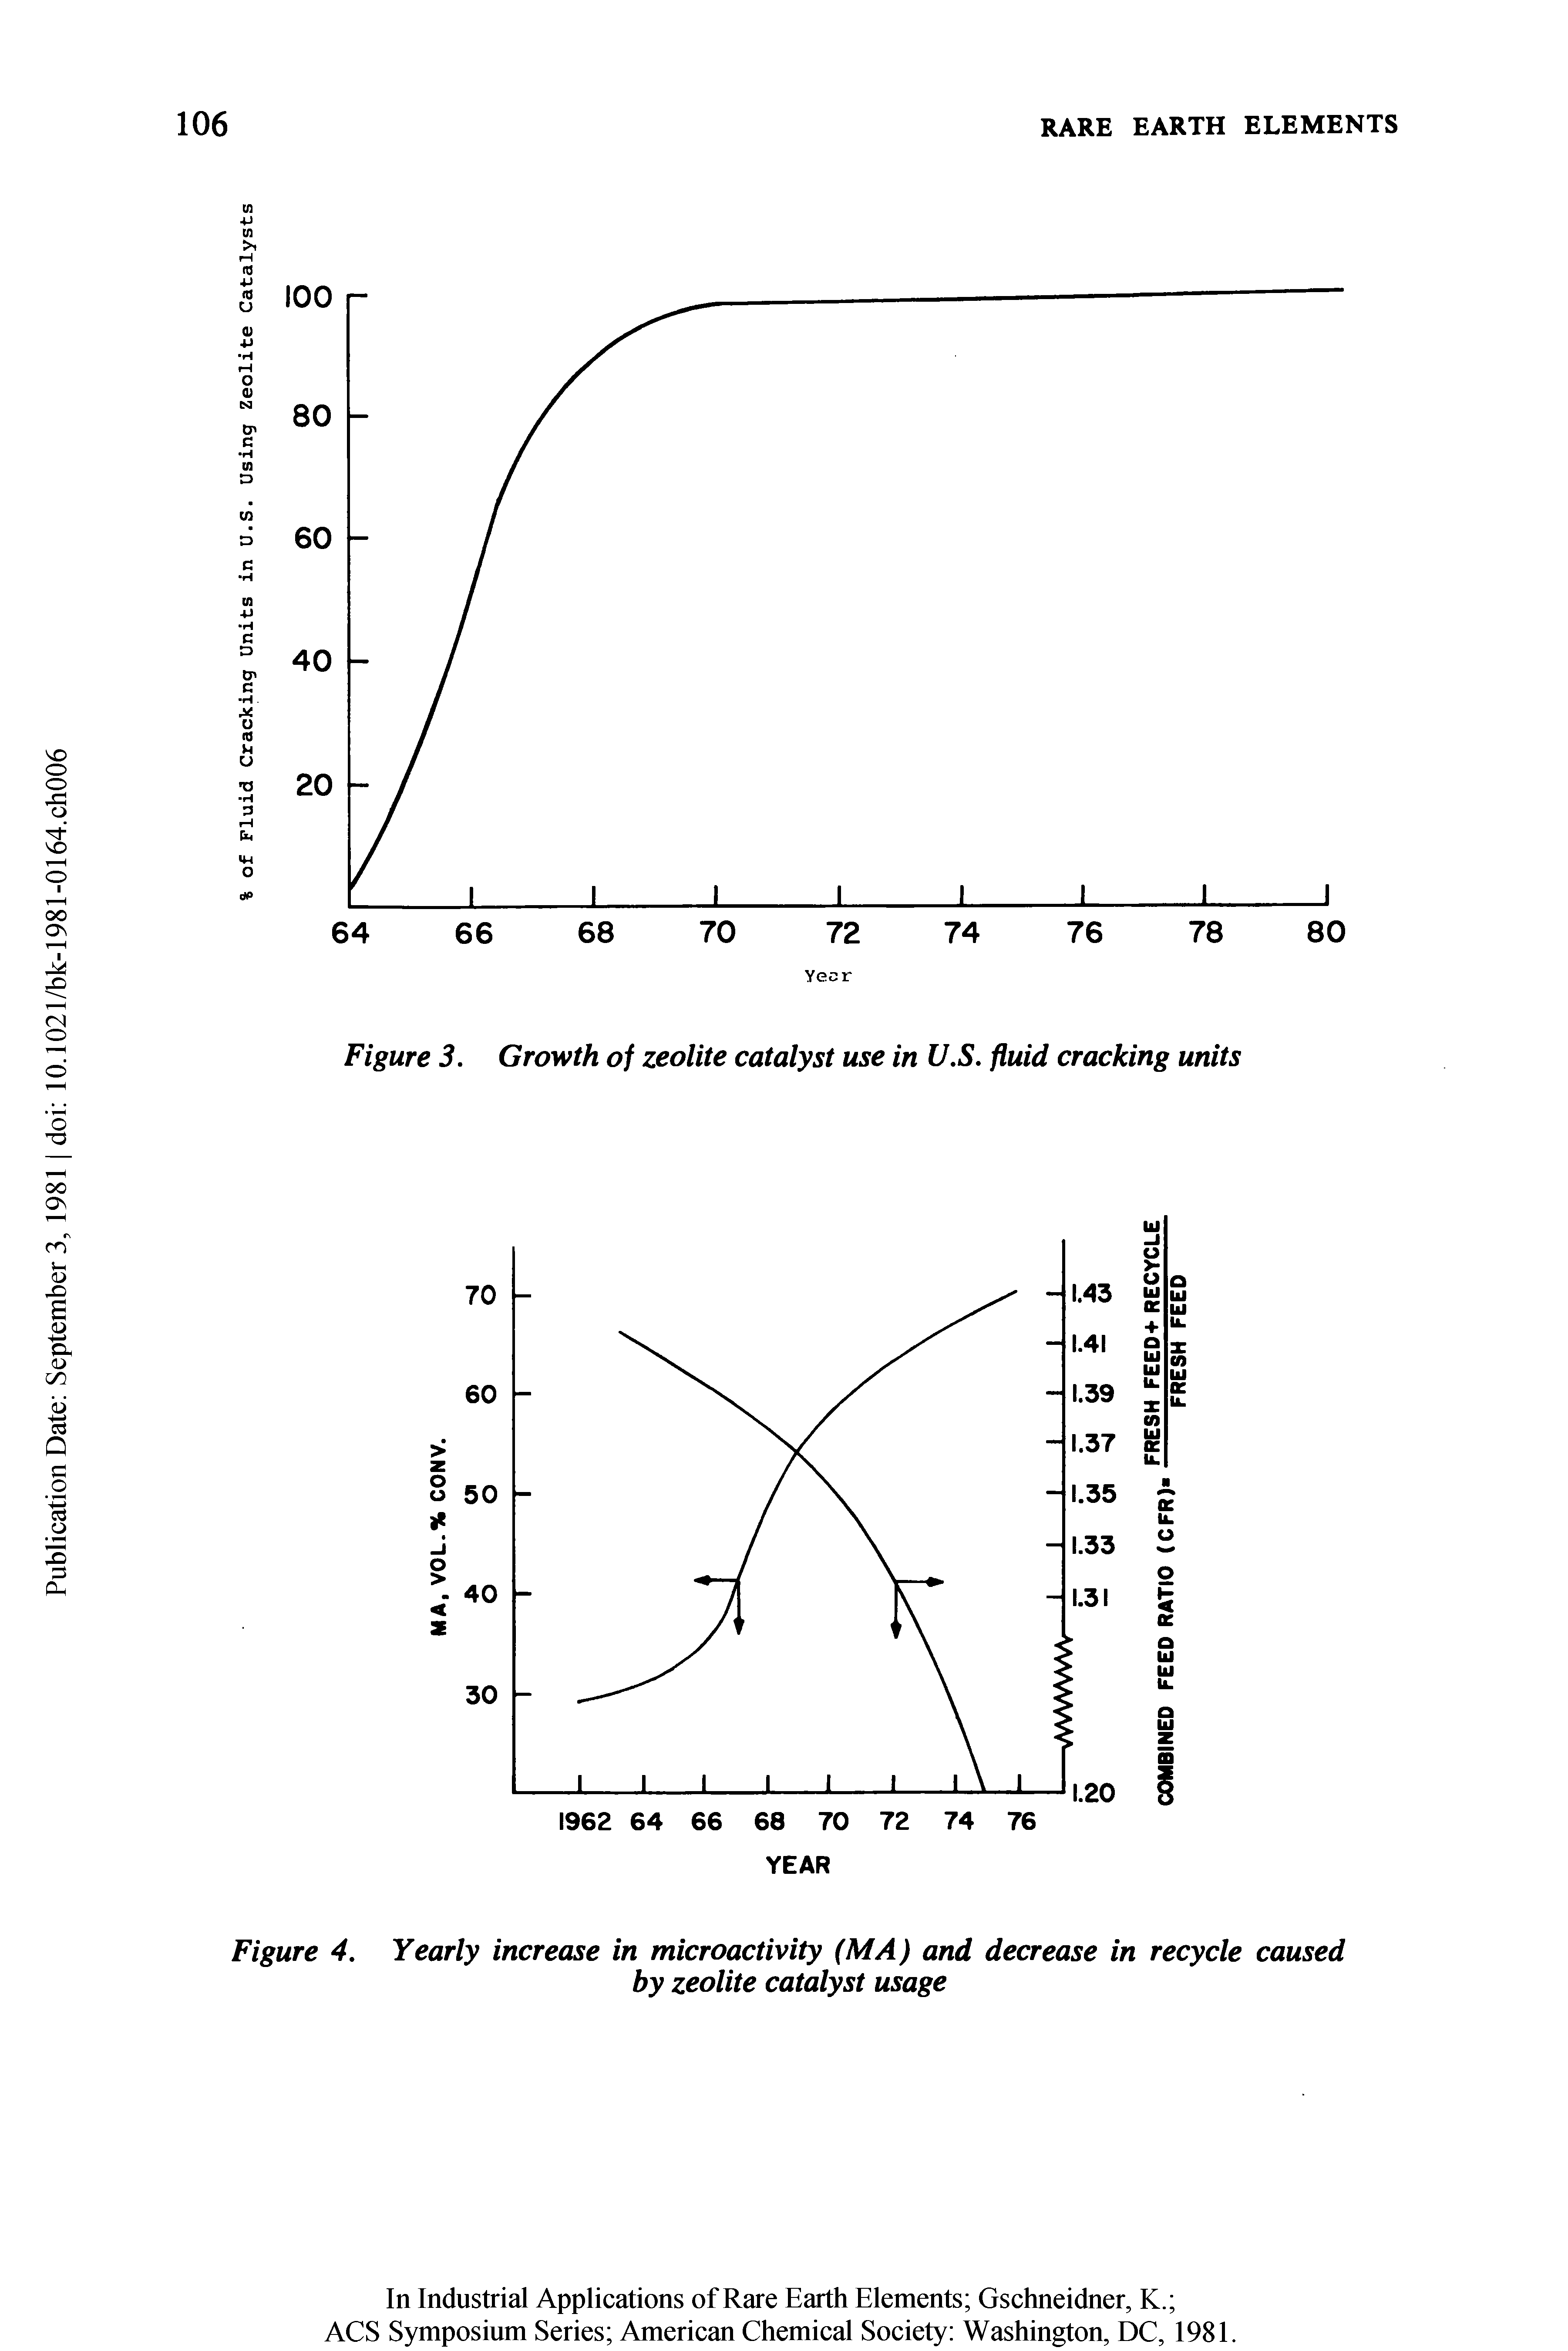 Figure 3. Growth of zeolite catalyst use in U.S. fluid cracking units...